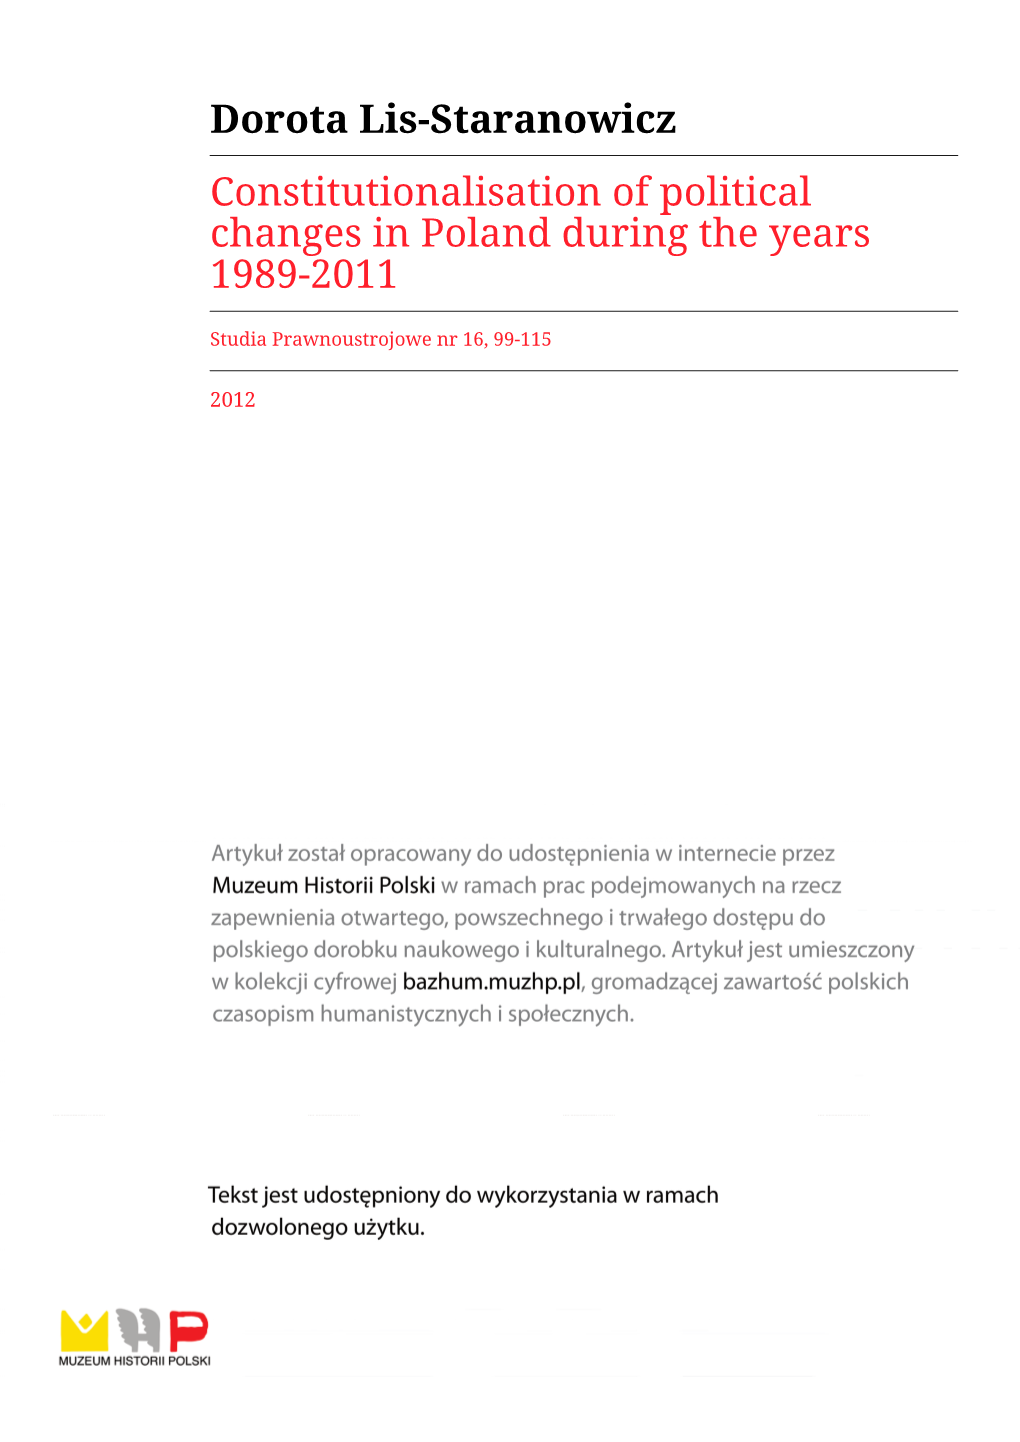 Dorota Lis-Staranowicz Constitutionalisation of Political Changes in Poland During the Years 1989-2011